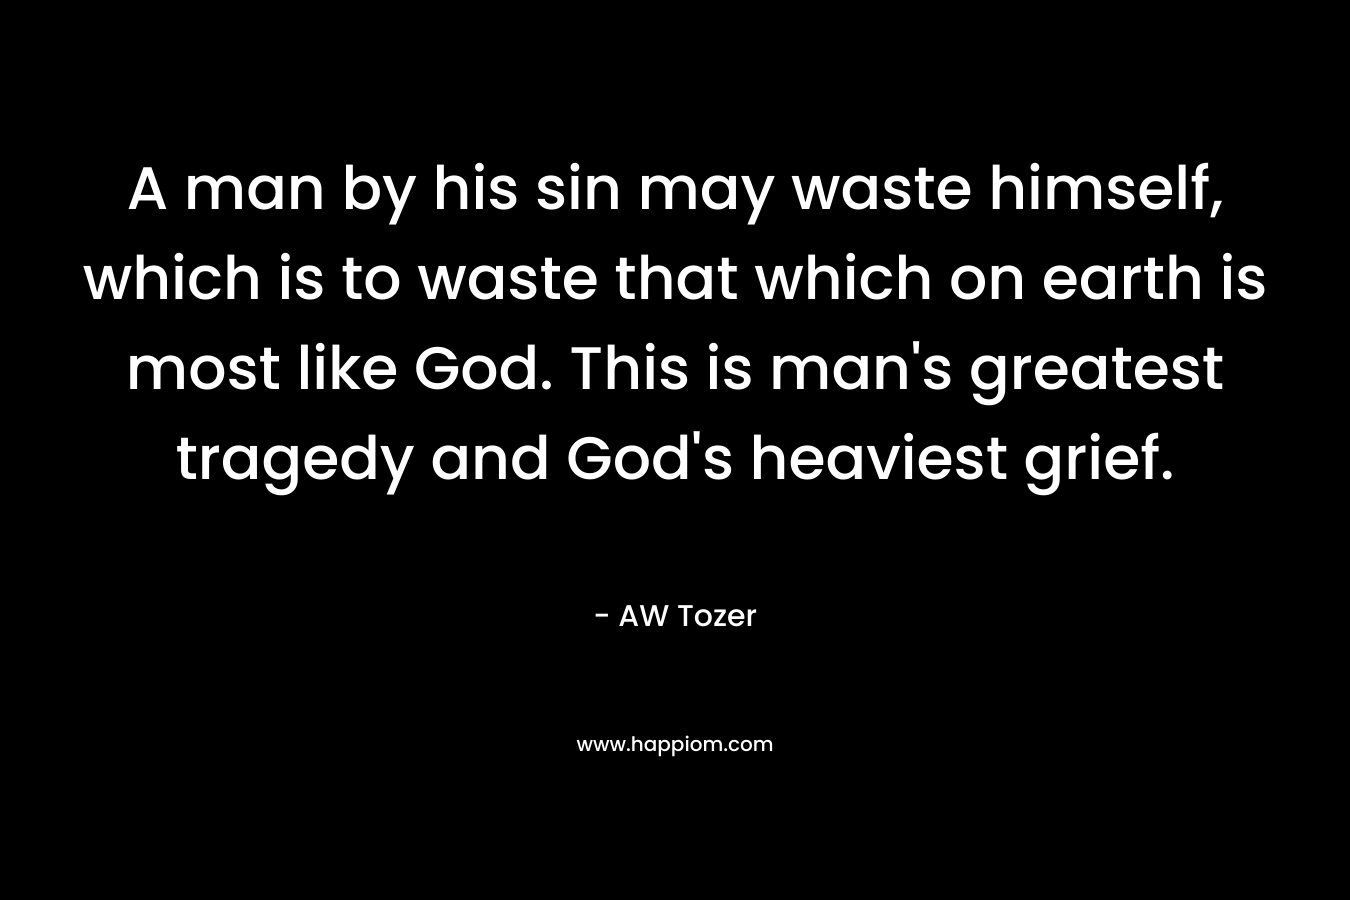 A man by his sin may waste himself, which is to waste that which on earth is most like God. This is man's greatest tragedy and God's heaviest grief.